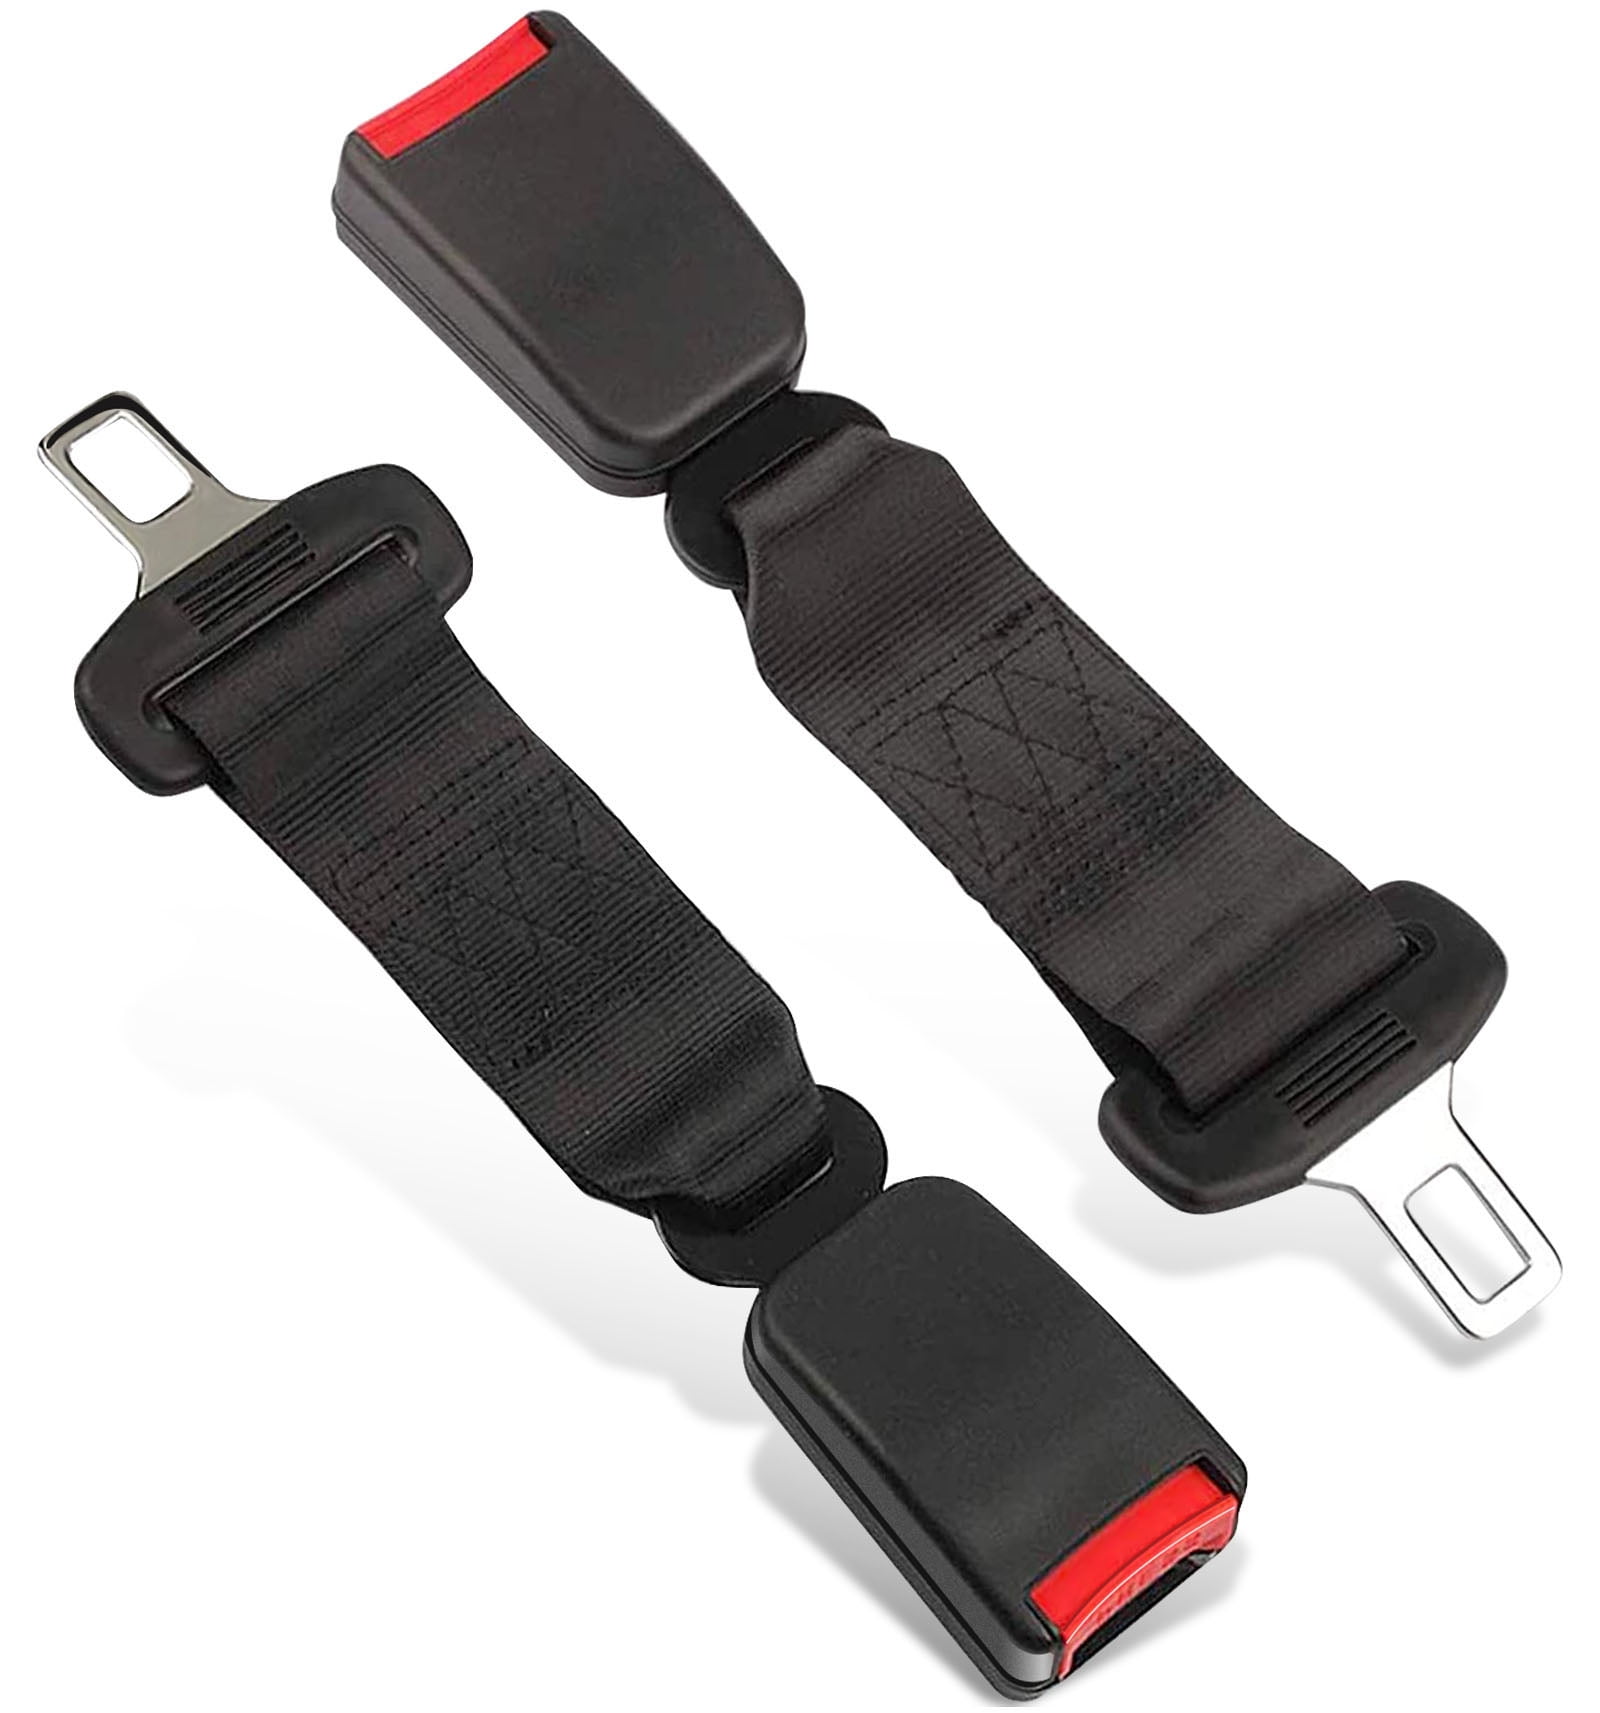 Seat Belt Extender, 2pcs Original Car Buckle Extender (7/8 inch Tongue Width) Accessories for Cars, Easy to Install, Buckle Up and Drive-In Comfort